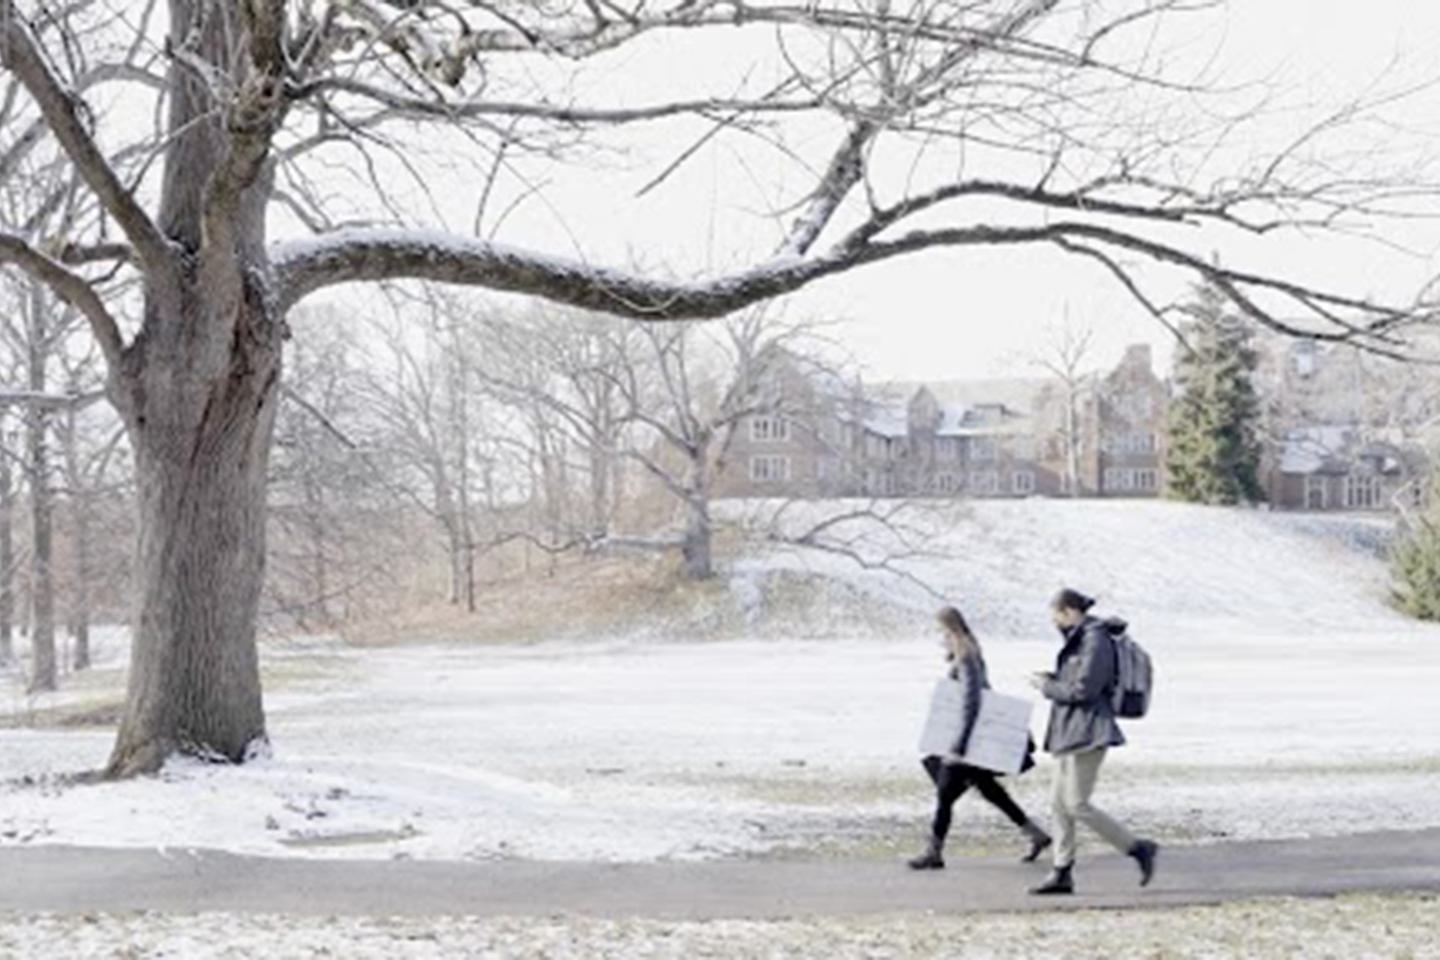 Two students walk across a snowy campus.